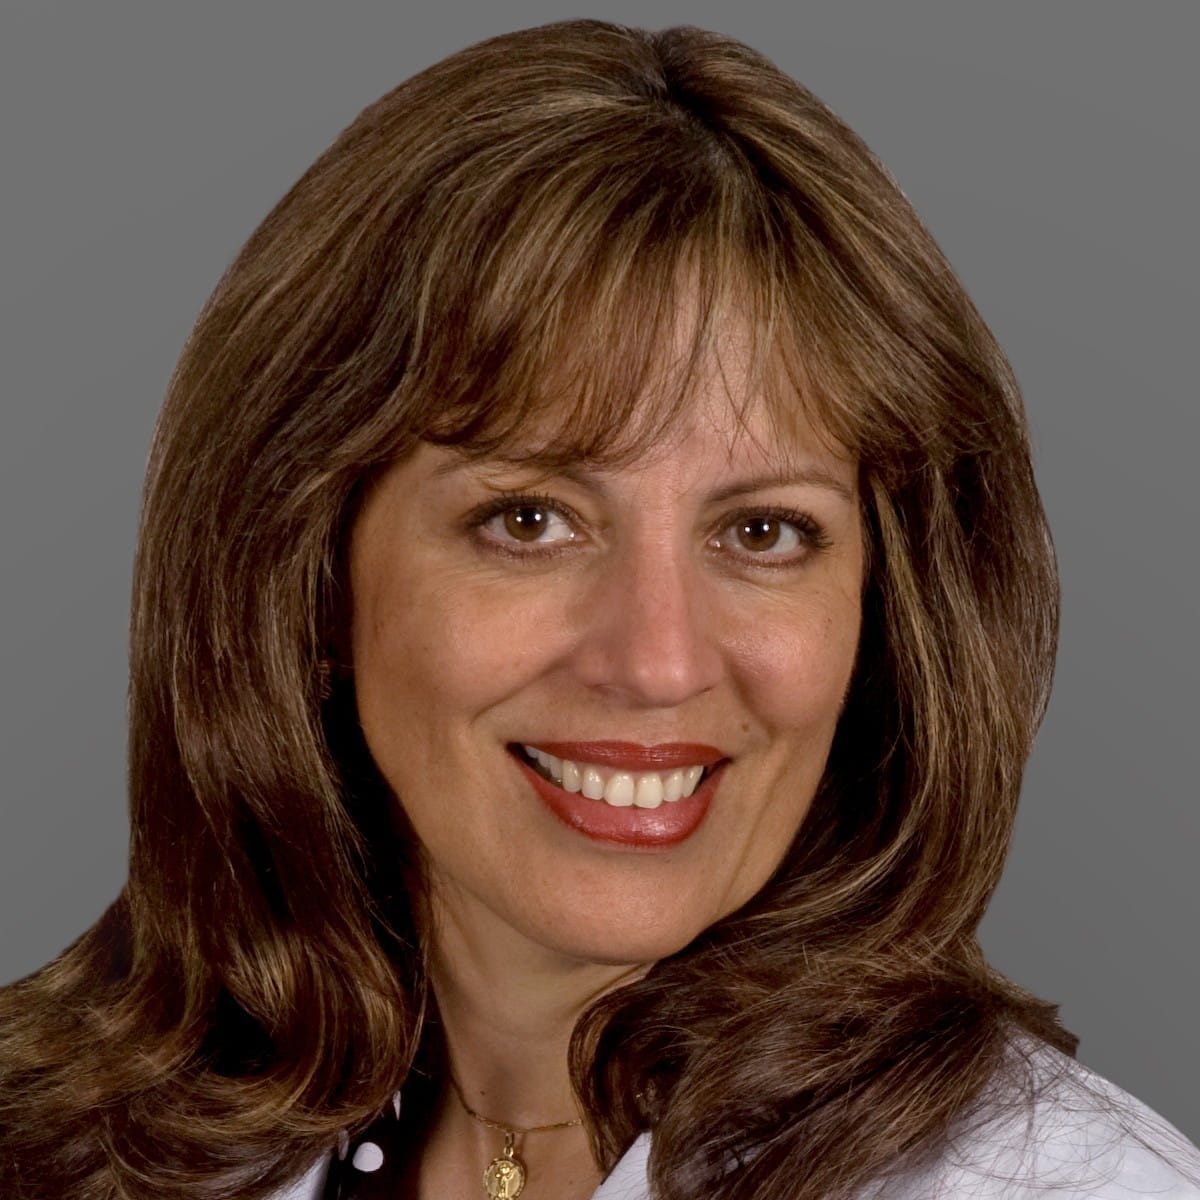 A friendly photo of Nydia Bladuell, MD